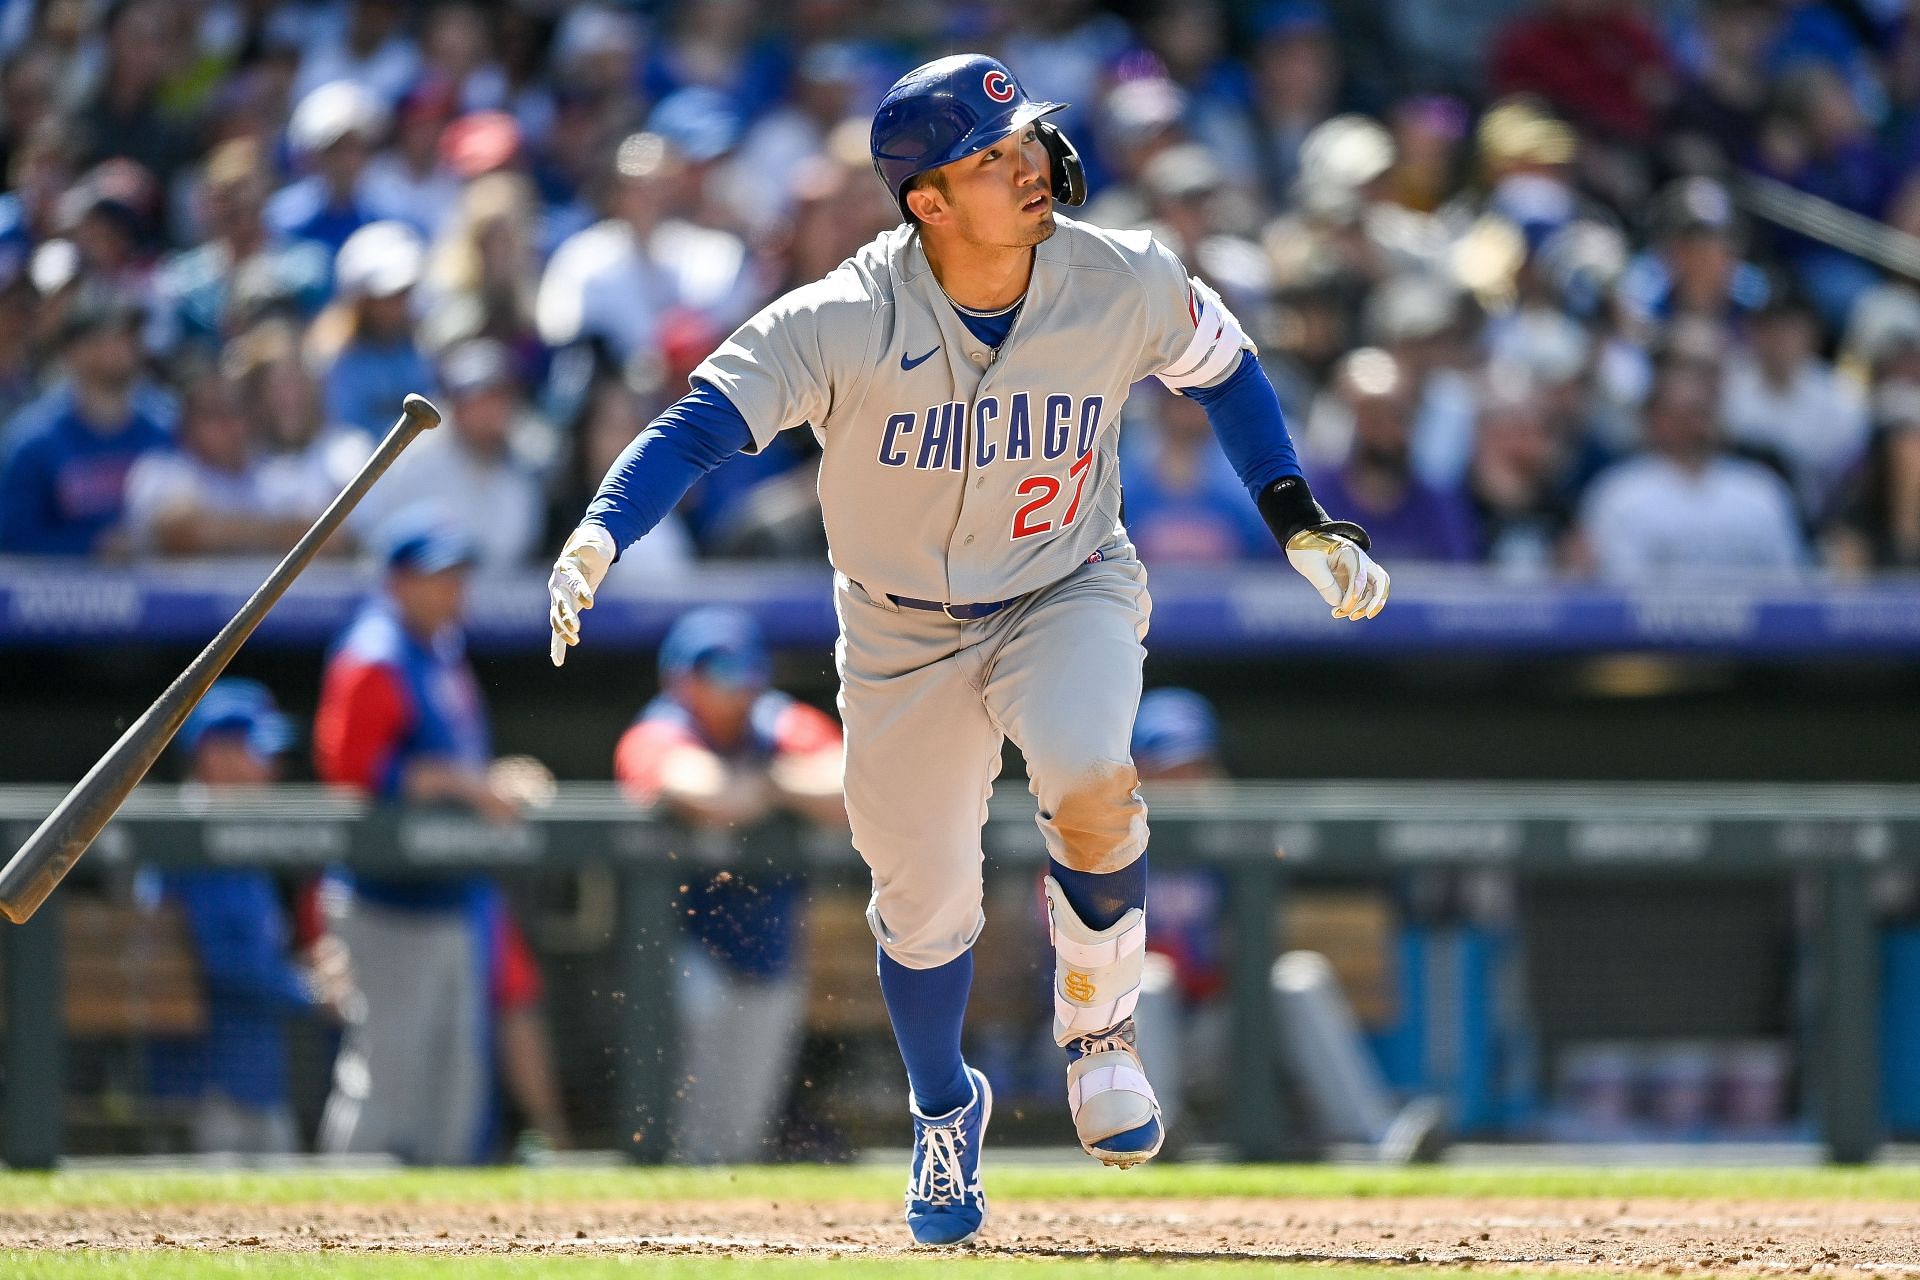 The rookie phenom for the Chicago Cubs is among the leaders in many offensive categories to start 2022.